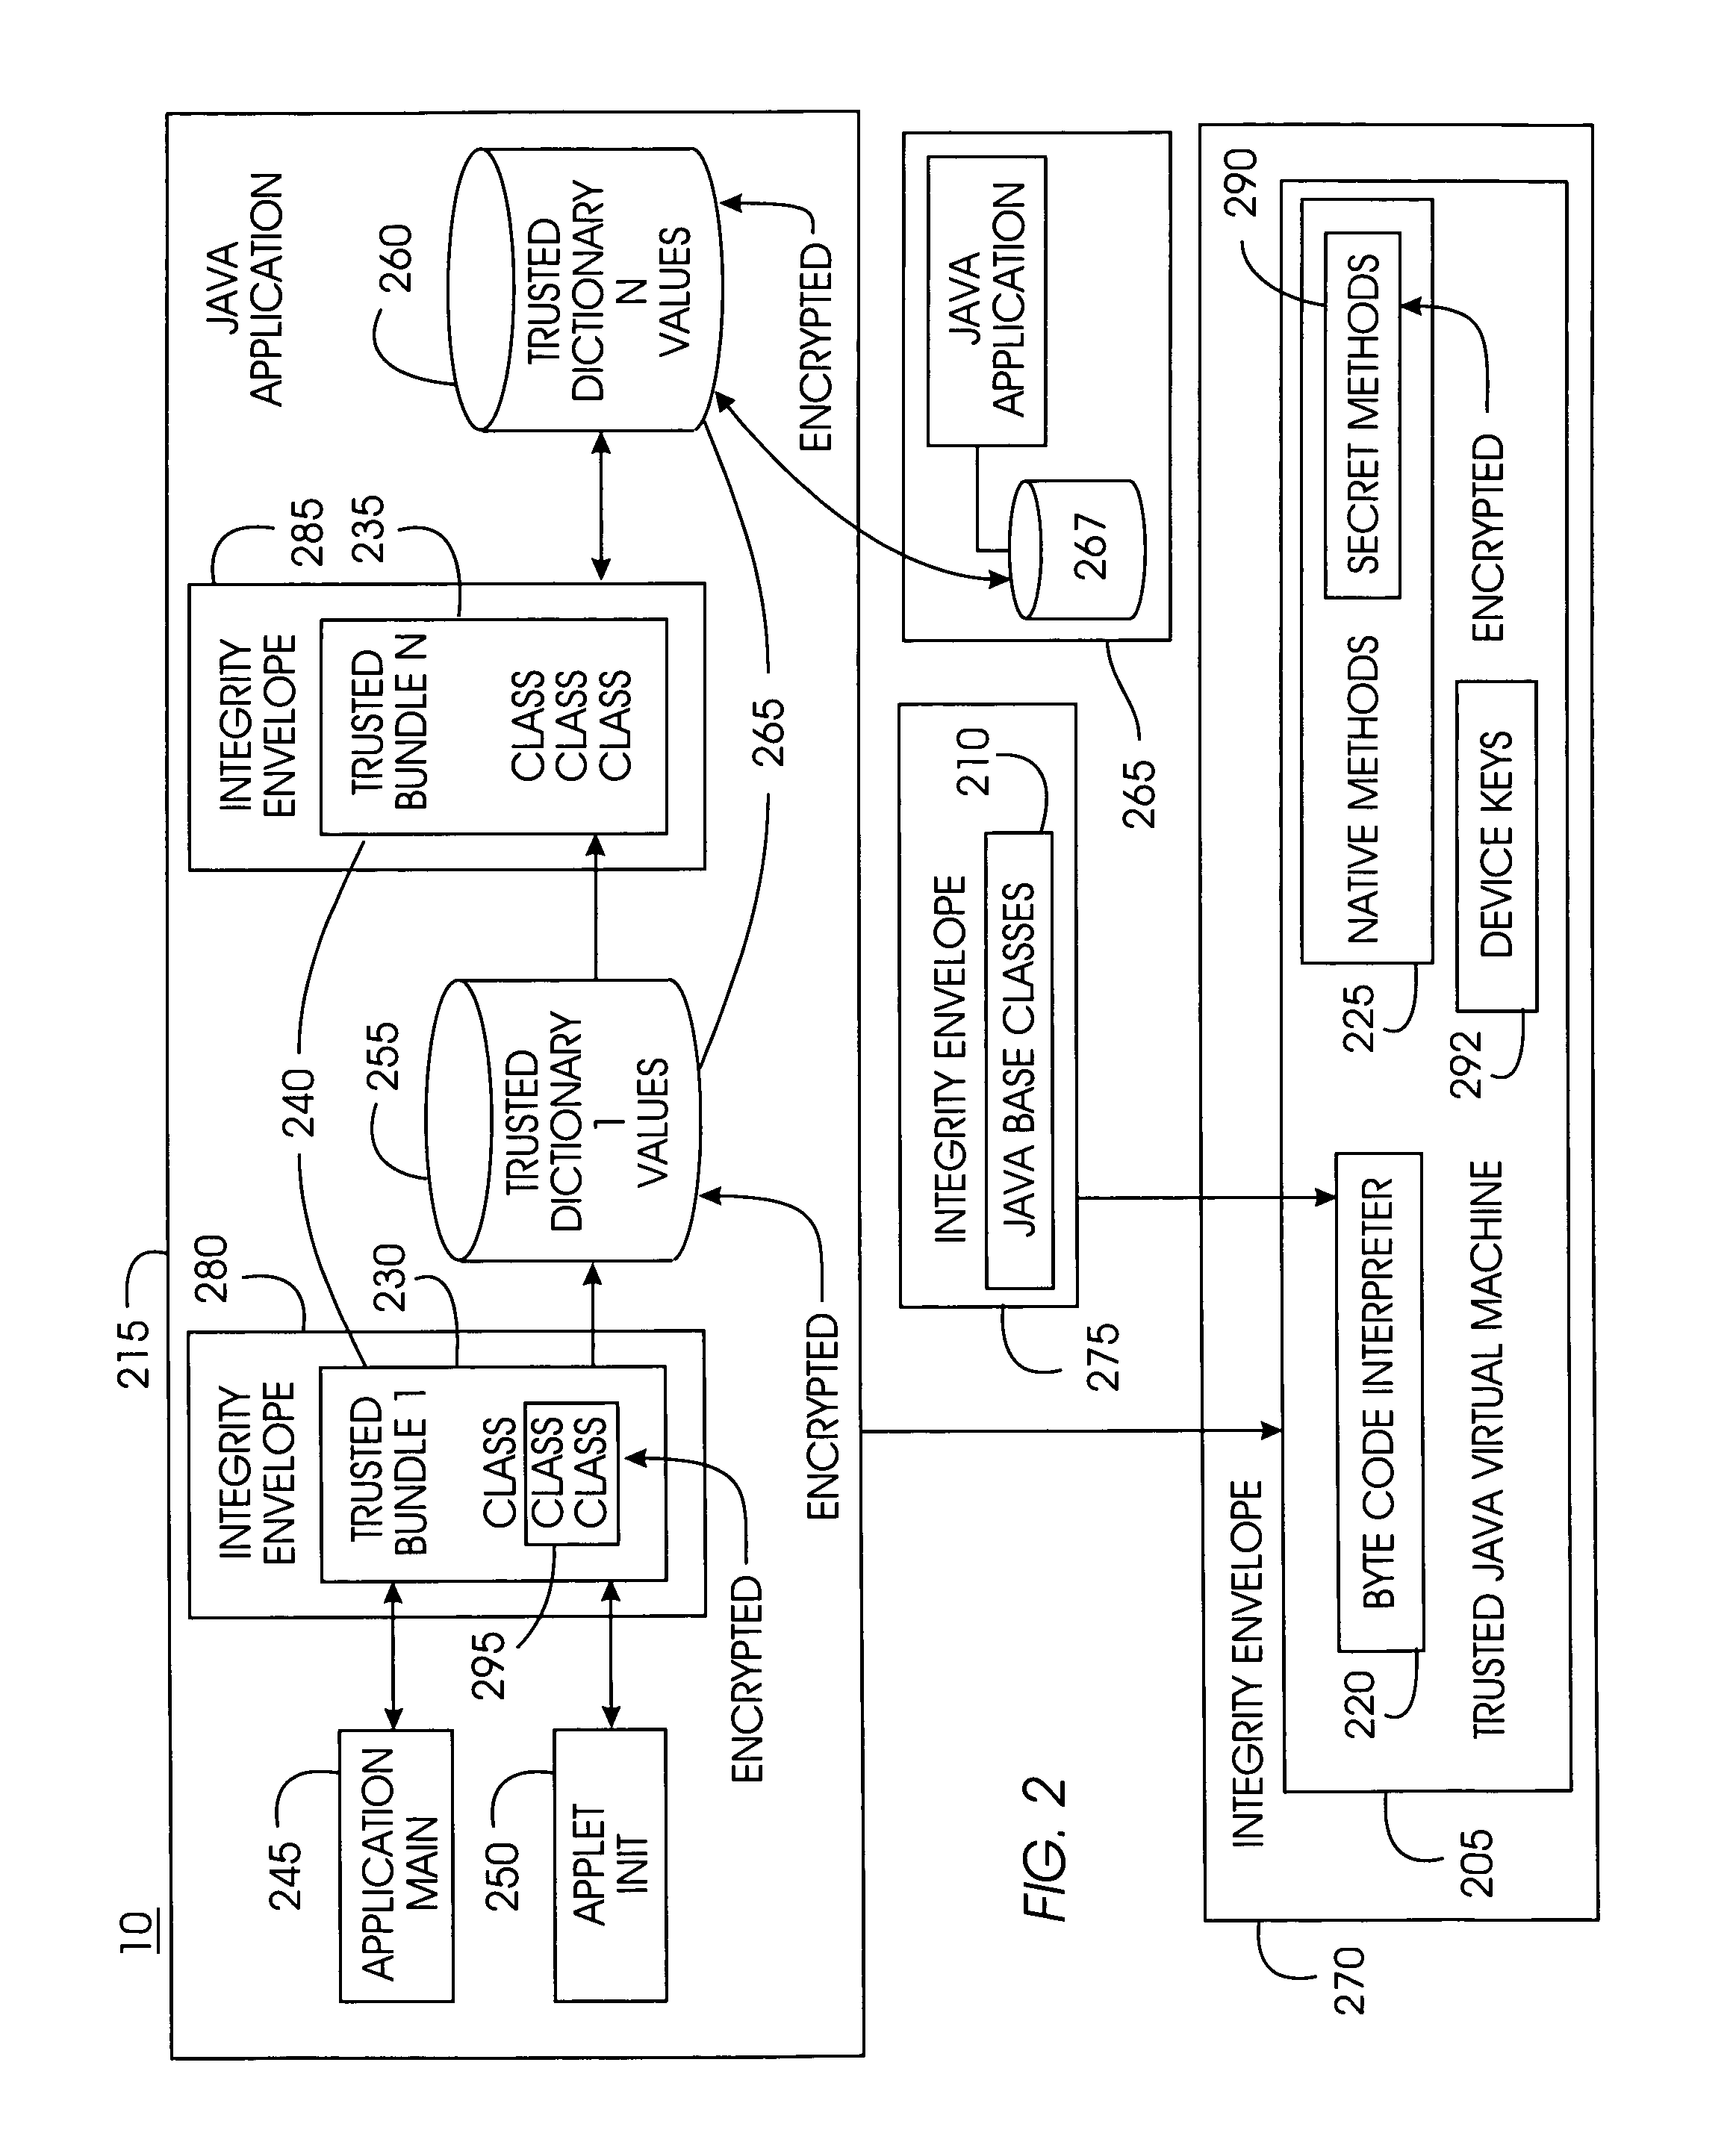 Tamper-resistant trusted java virtual machine and method of using the same